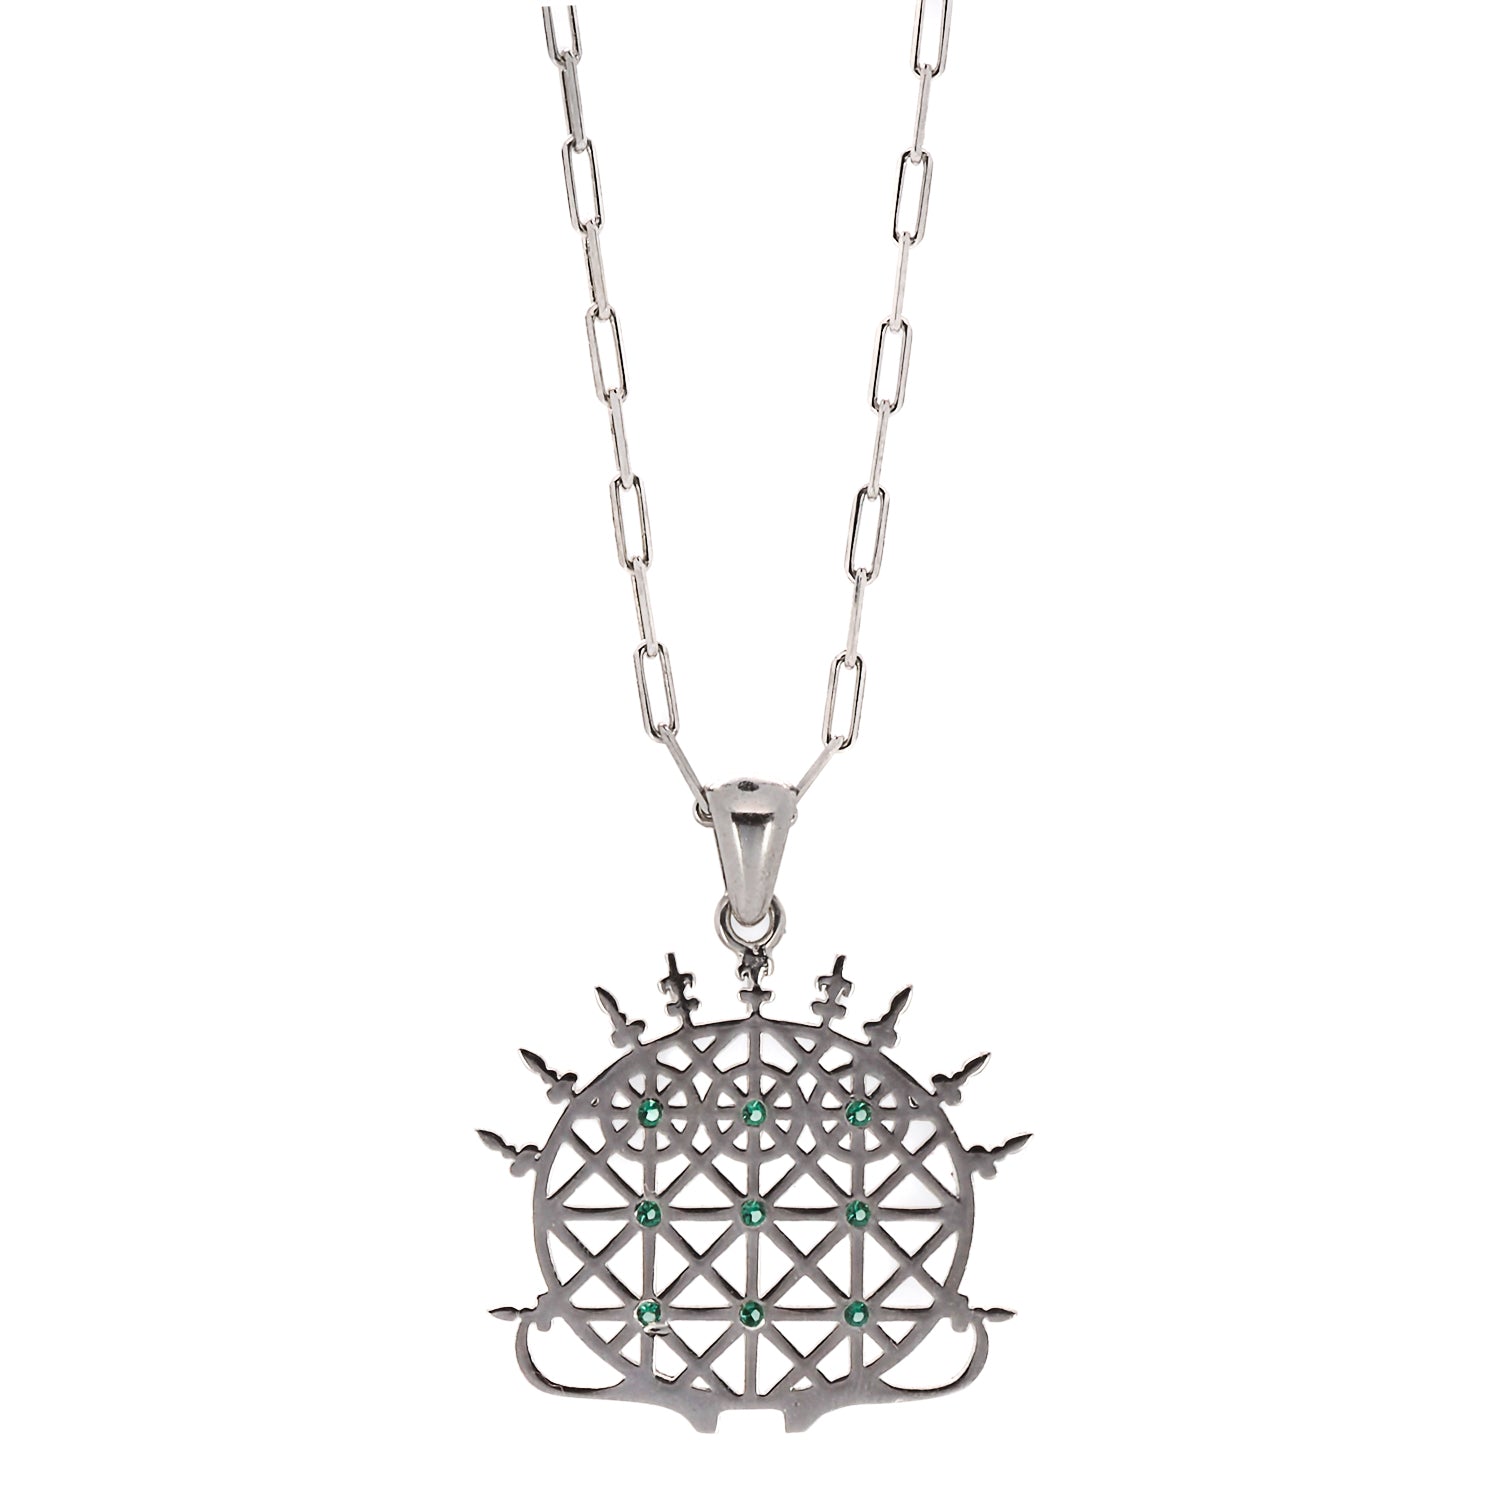 The Silver Hittite Sun Disc Necklace, featuring a sterling silver pendant with a choice of green jade or ruby stone, on a delicate silver chain.